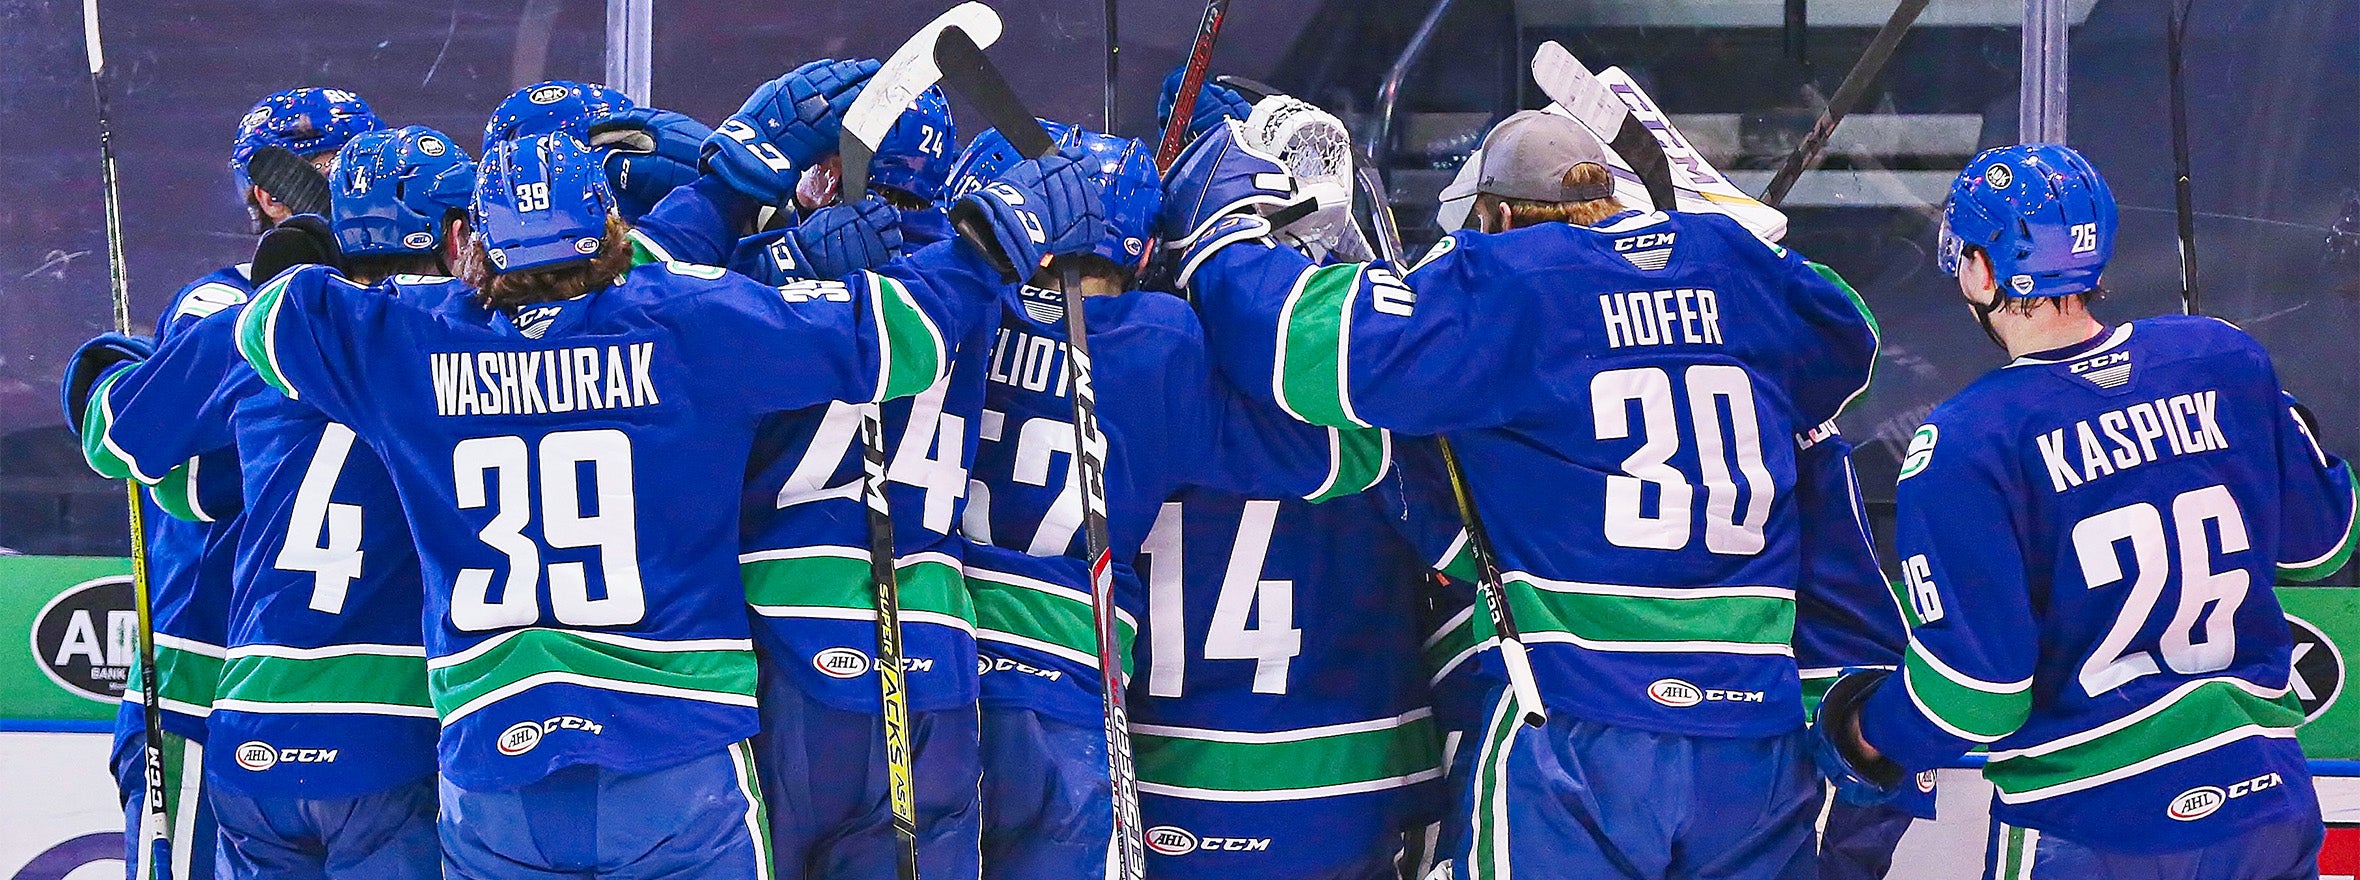 COMETS WIN 5-4 IN OVERTIME